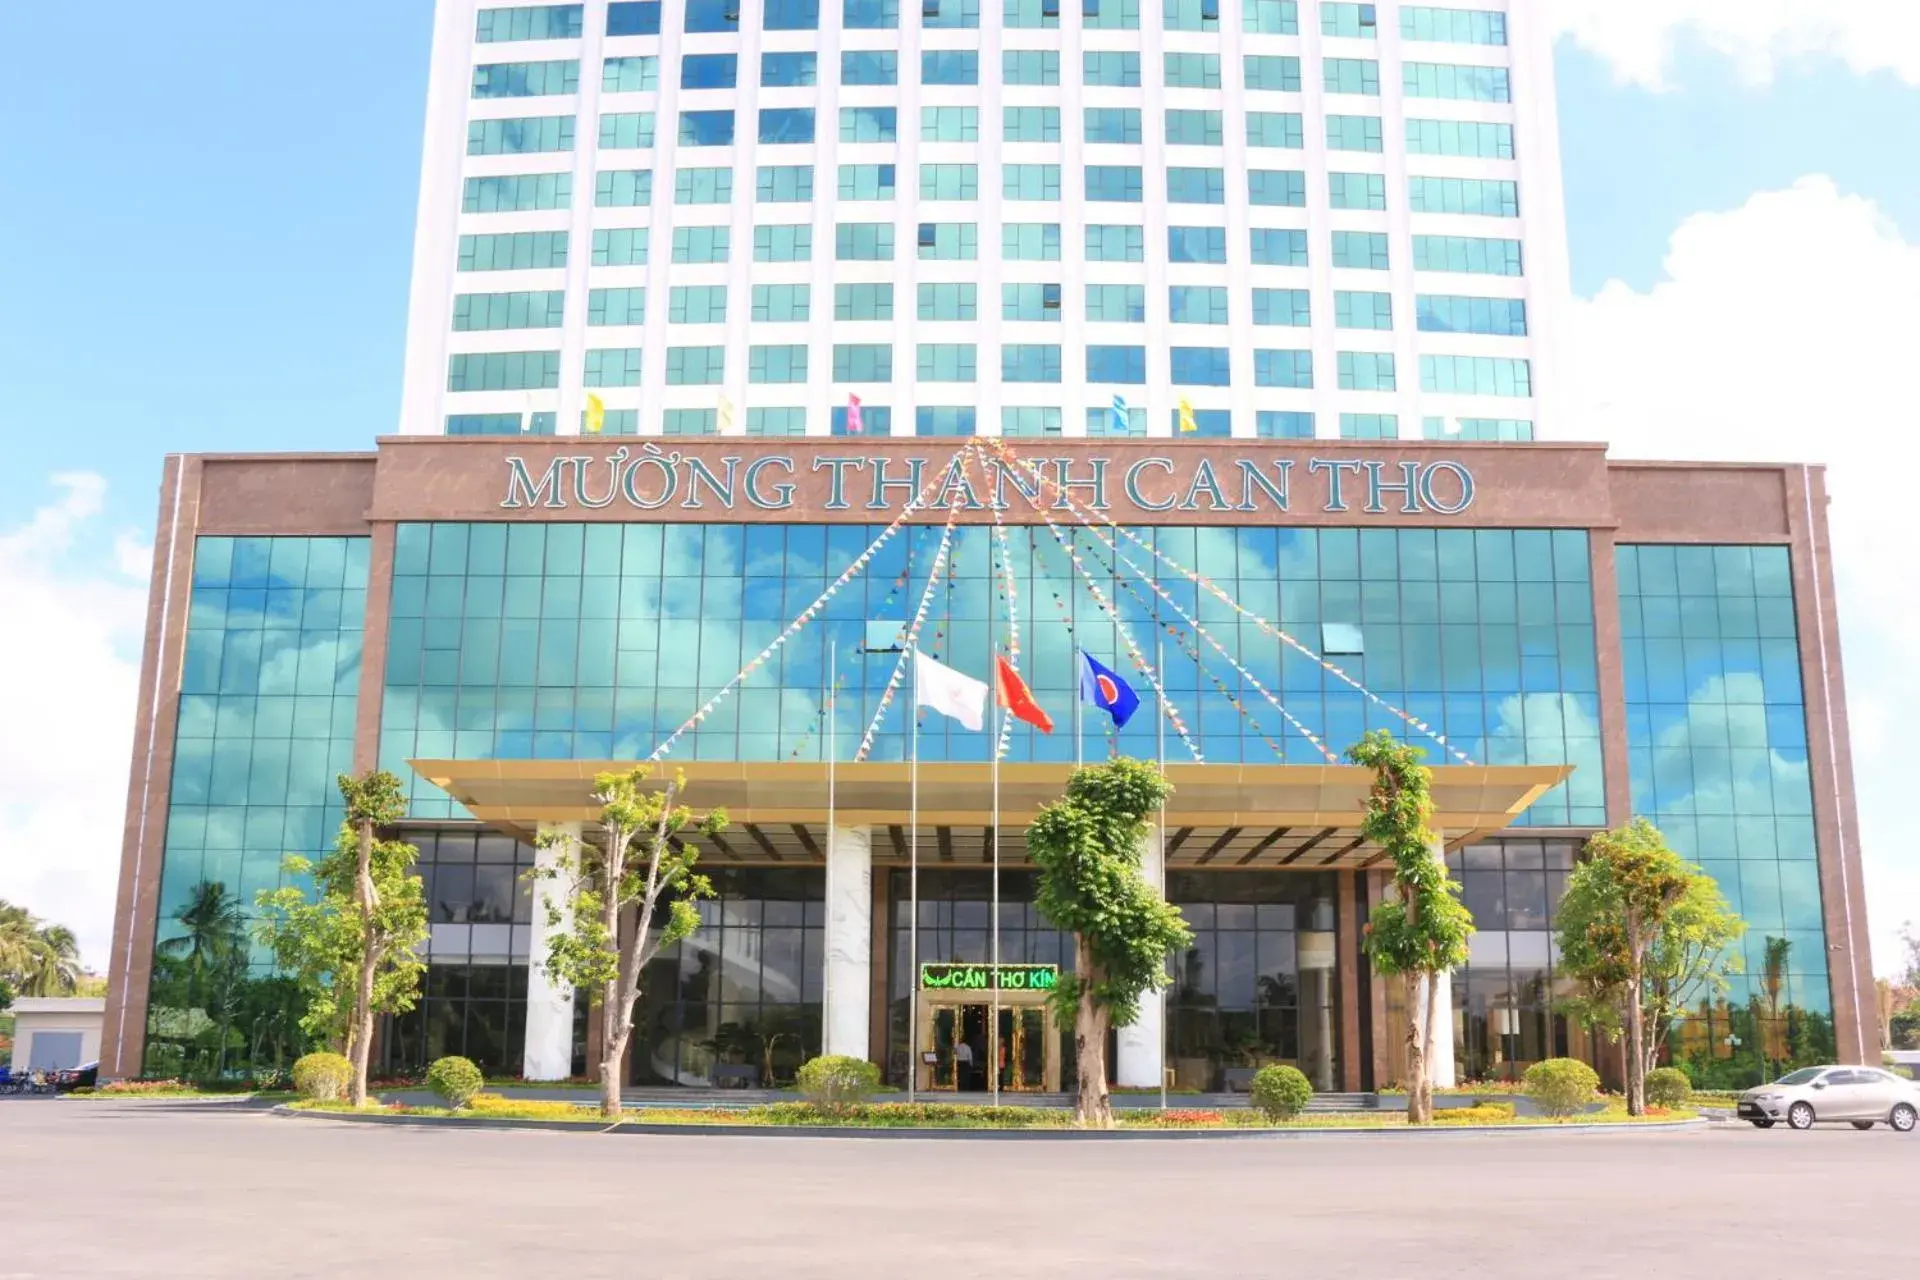 Property Building in Muong Thanh Luxury Can Tho Hotel